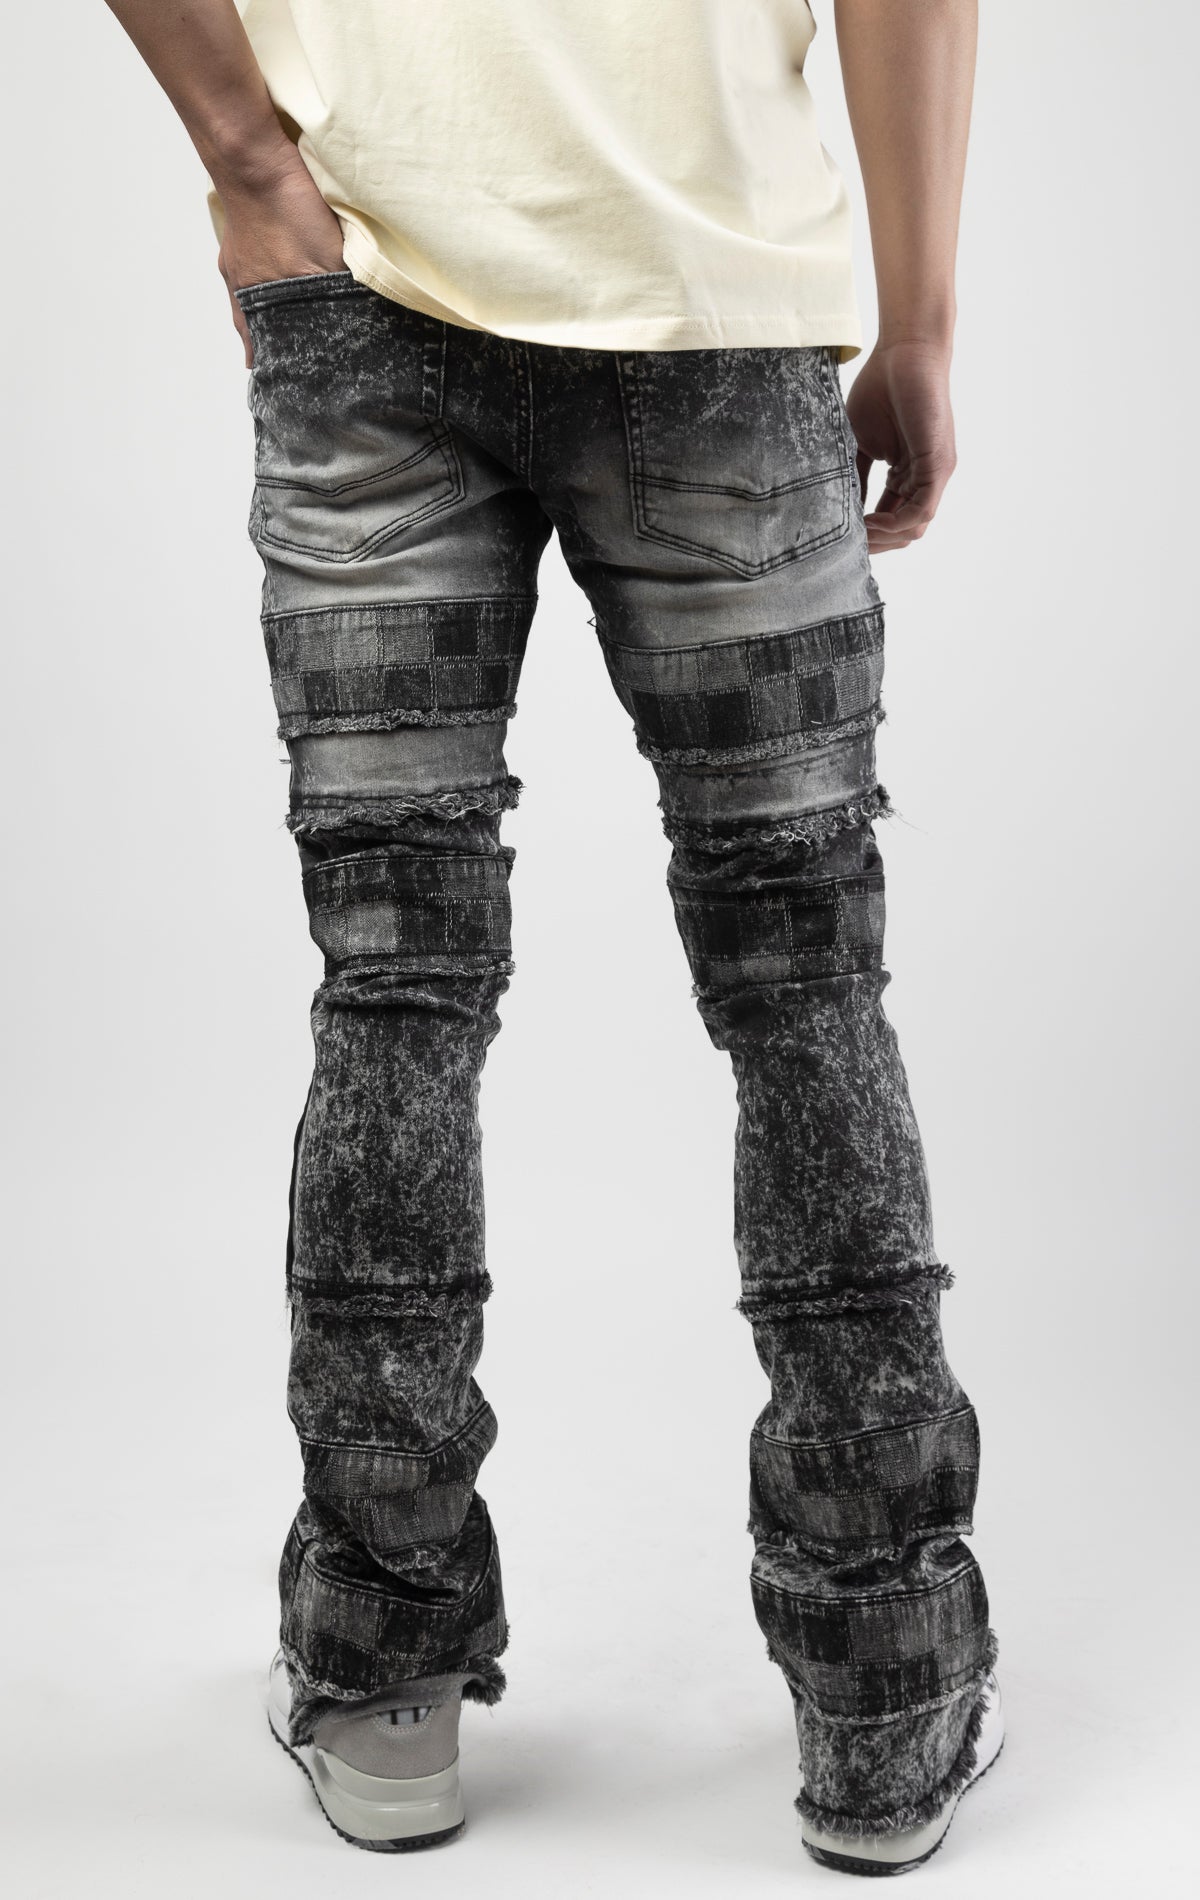 Black wash iconic stacked jeans crafted from high-quality, durable denim fabric consisting of 98% cotton and 2% spandex with a semi flare silhouette and a length of 35